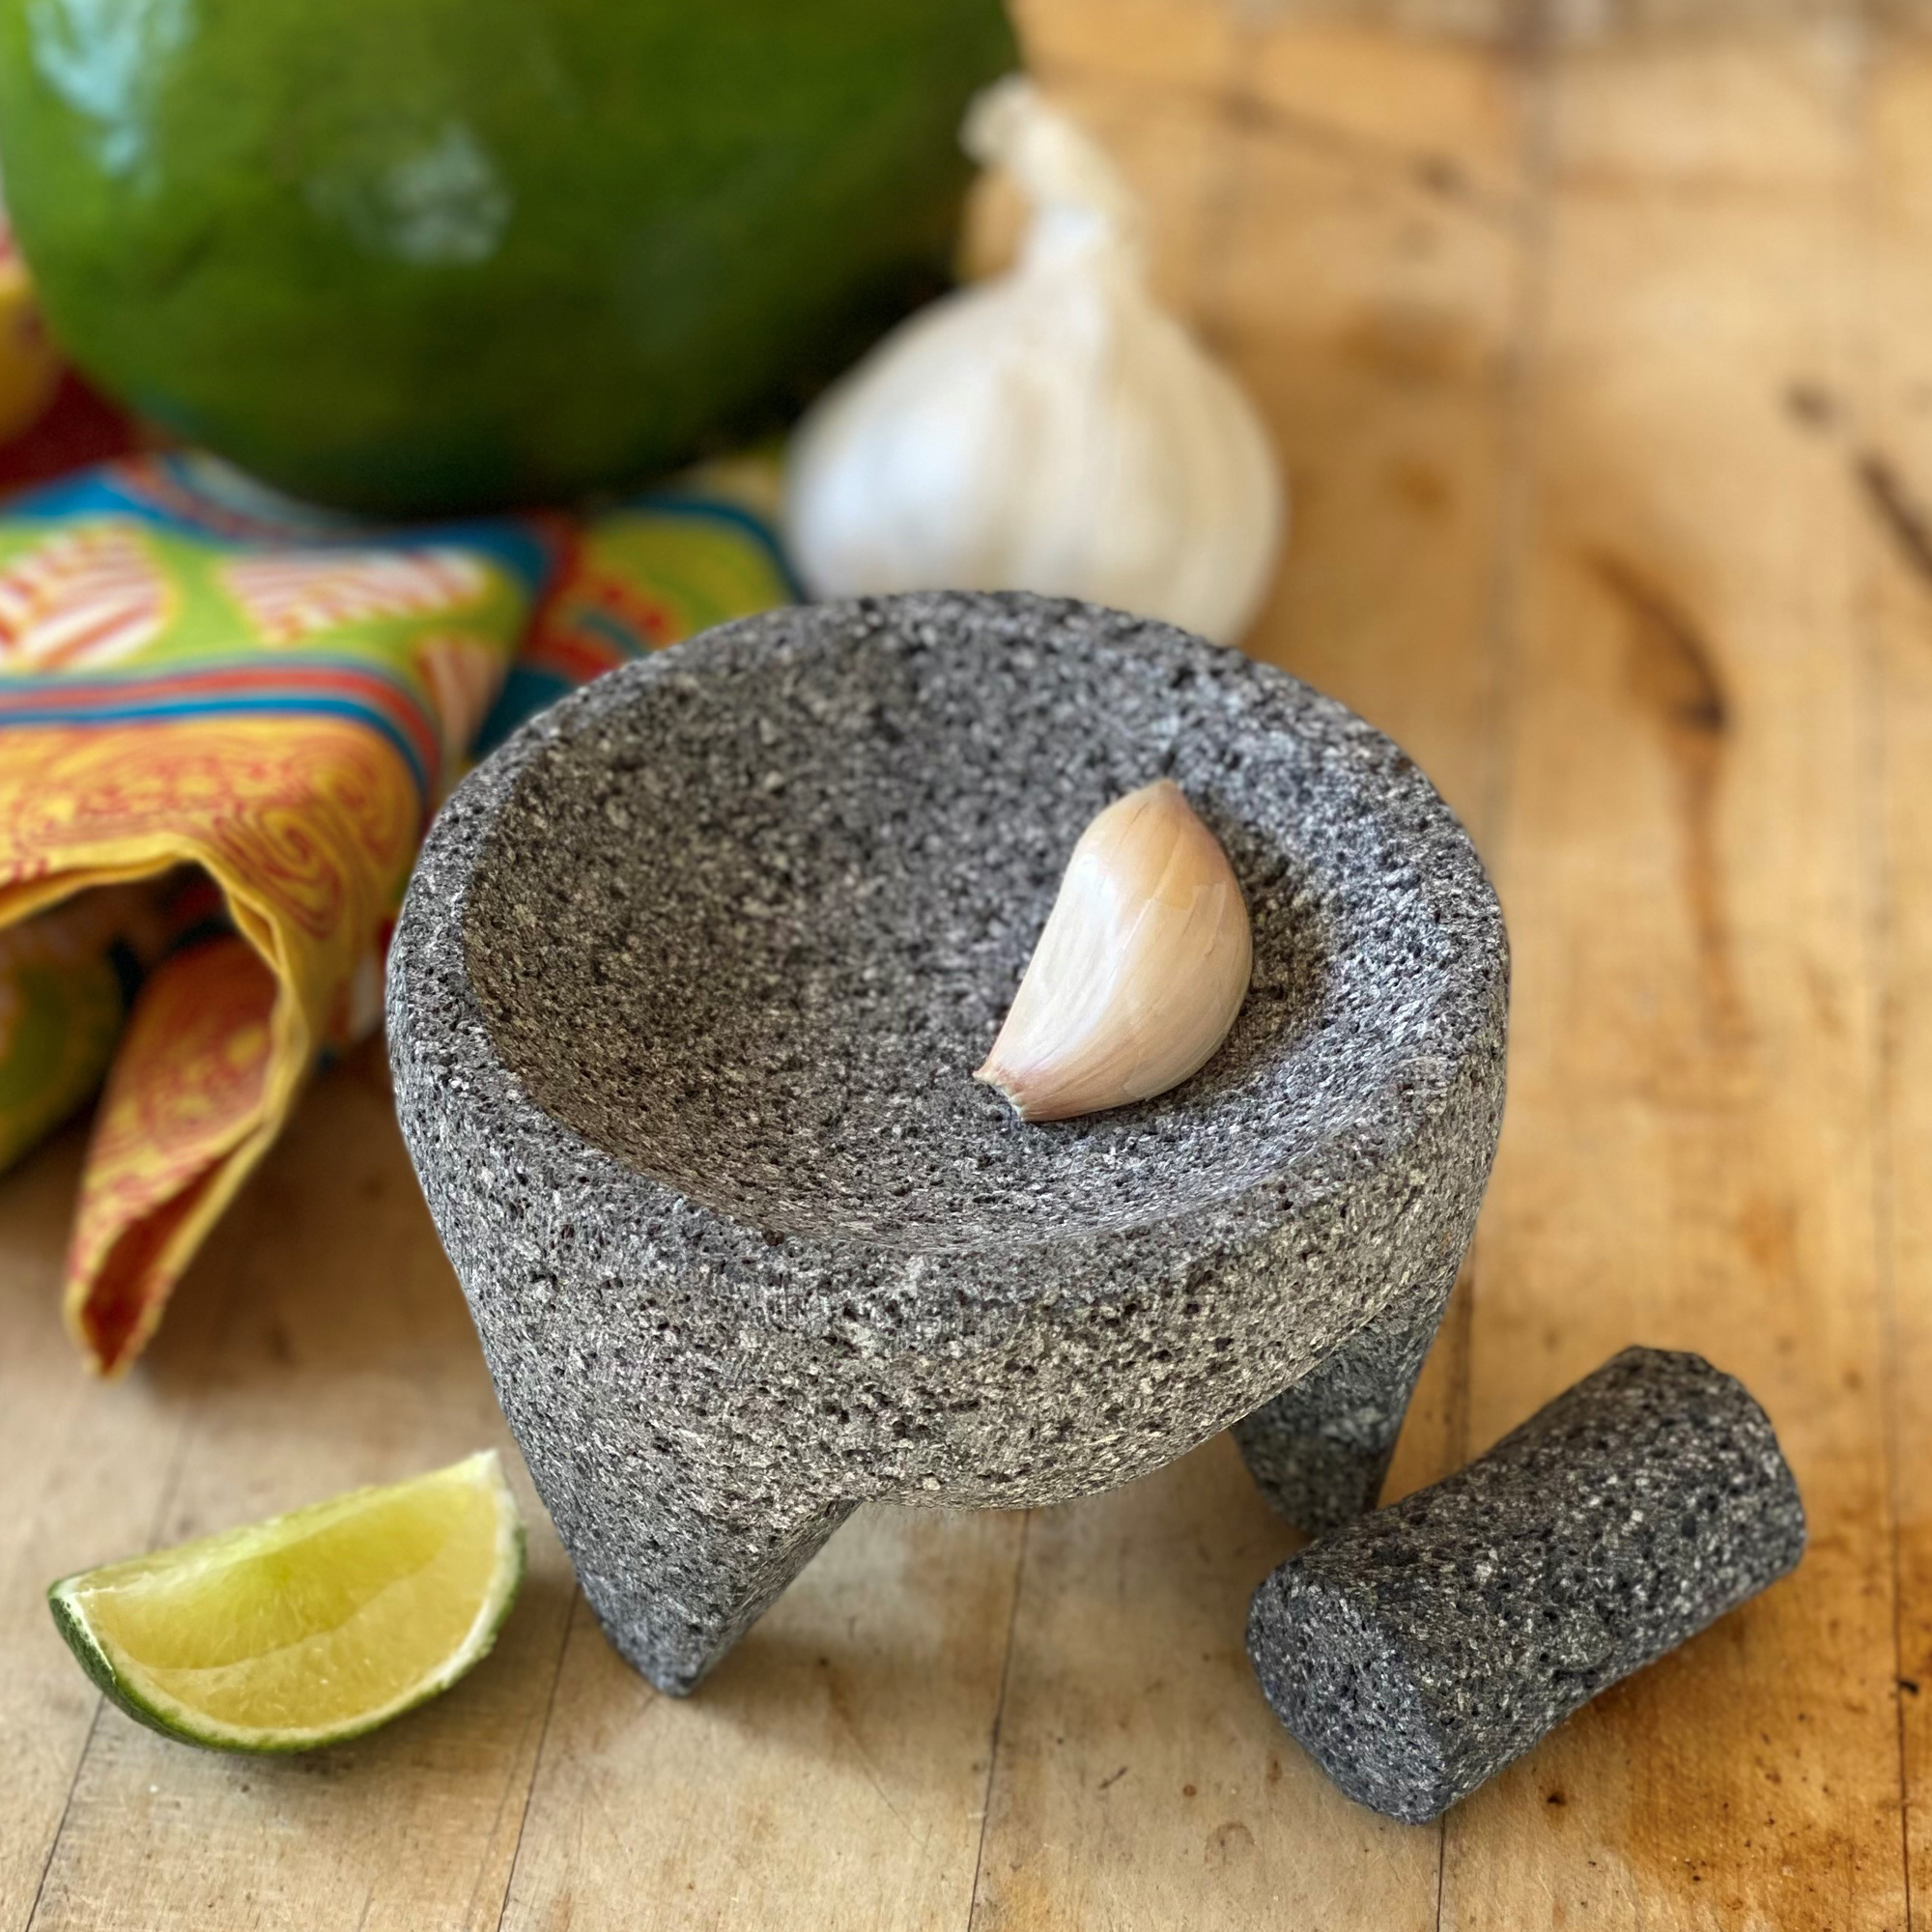 Mexican Volcanic Mortar and Pestle (Molcajete)